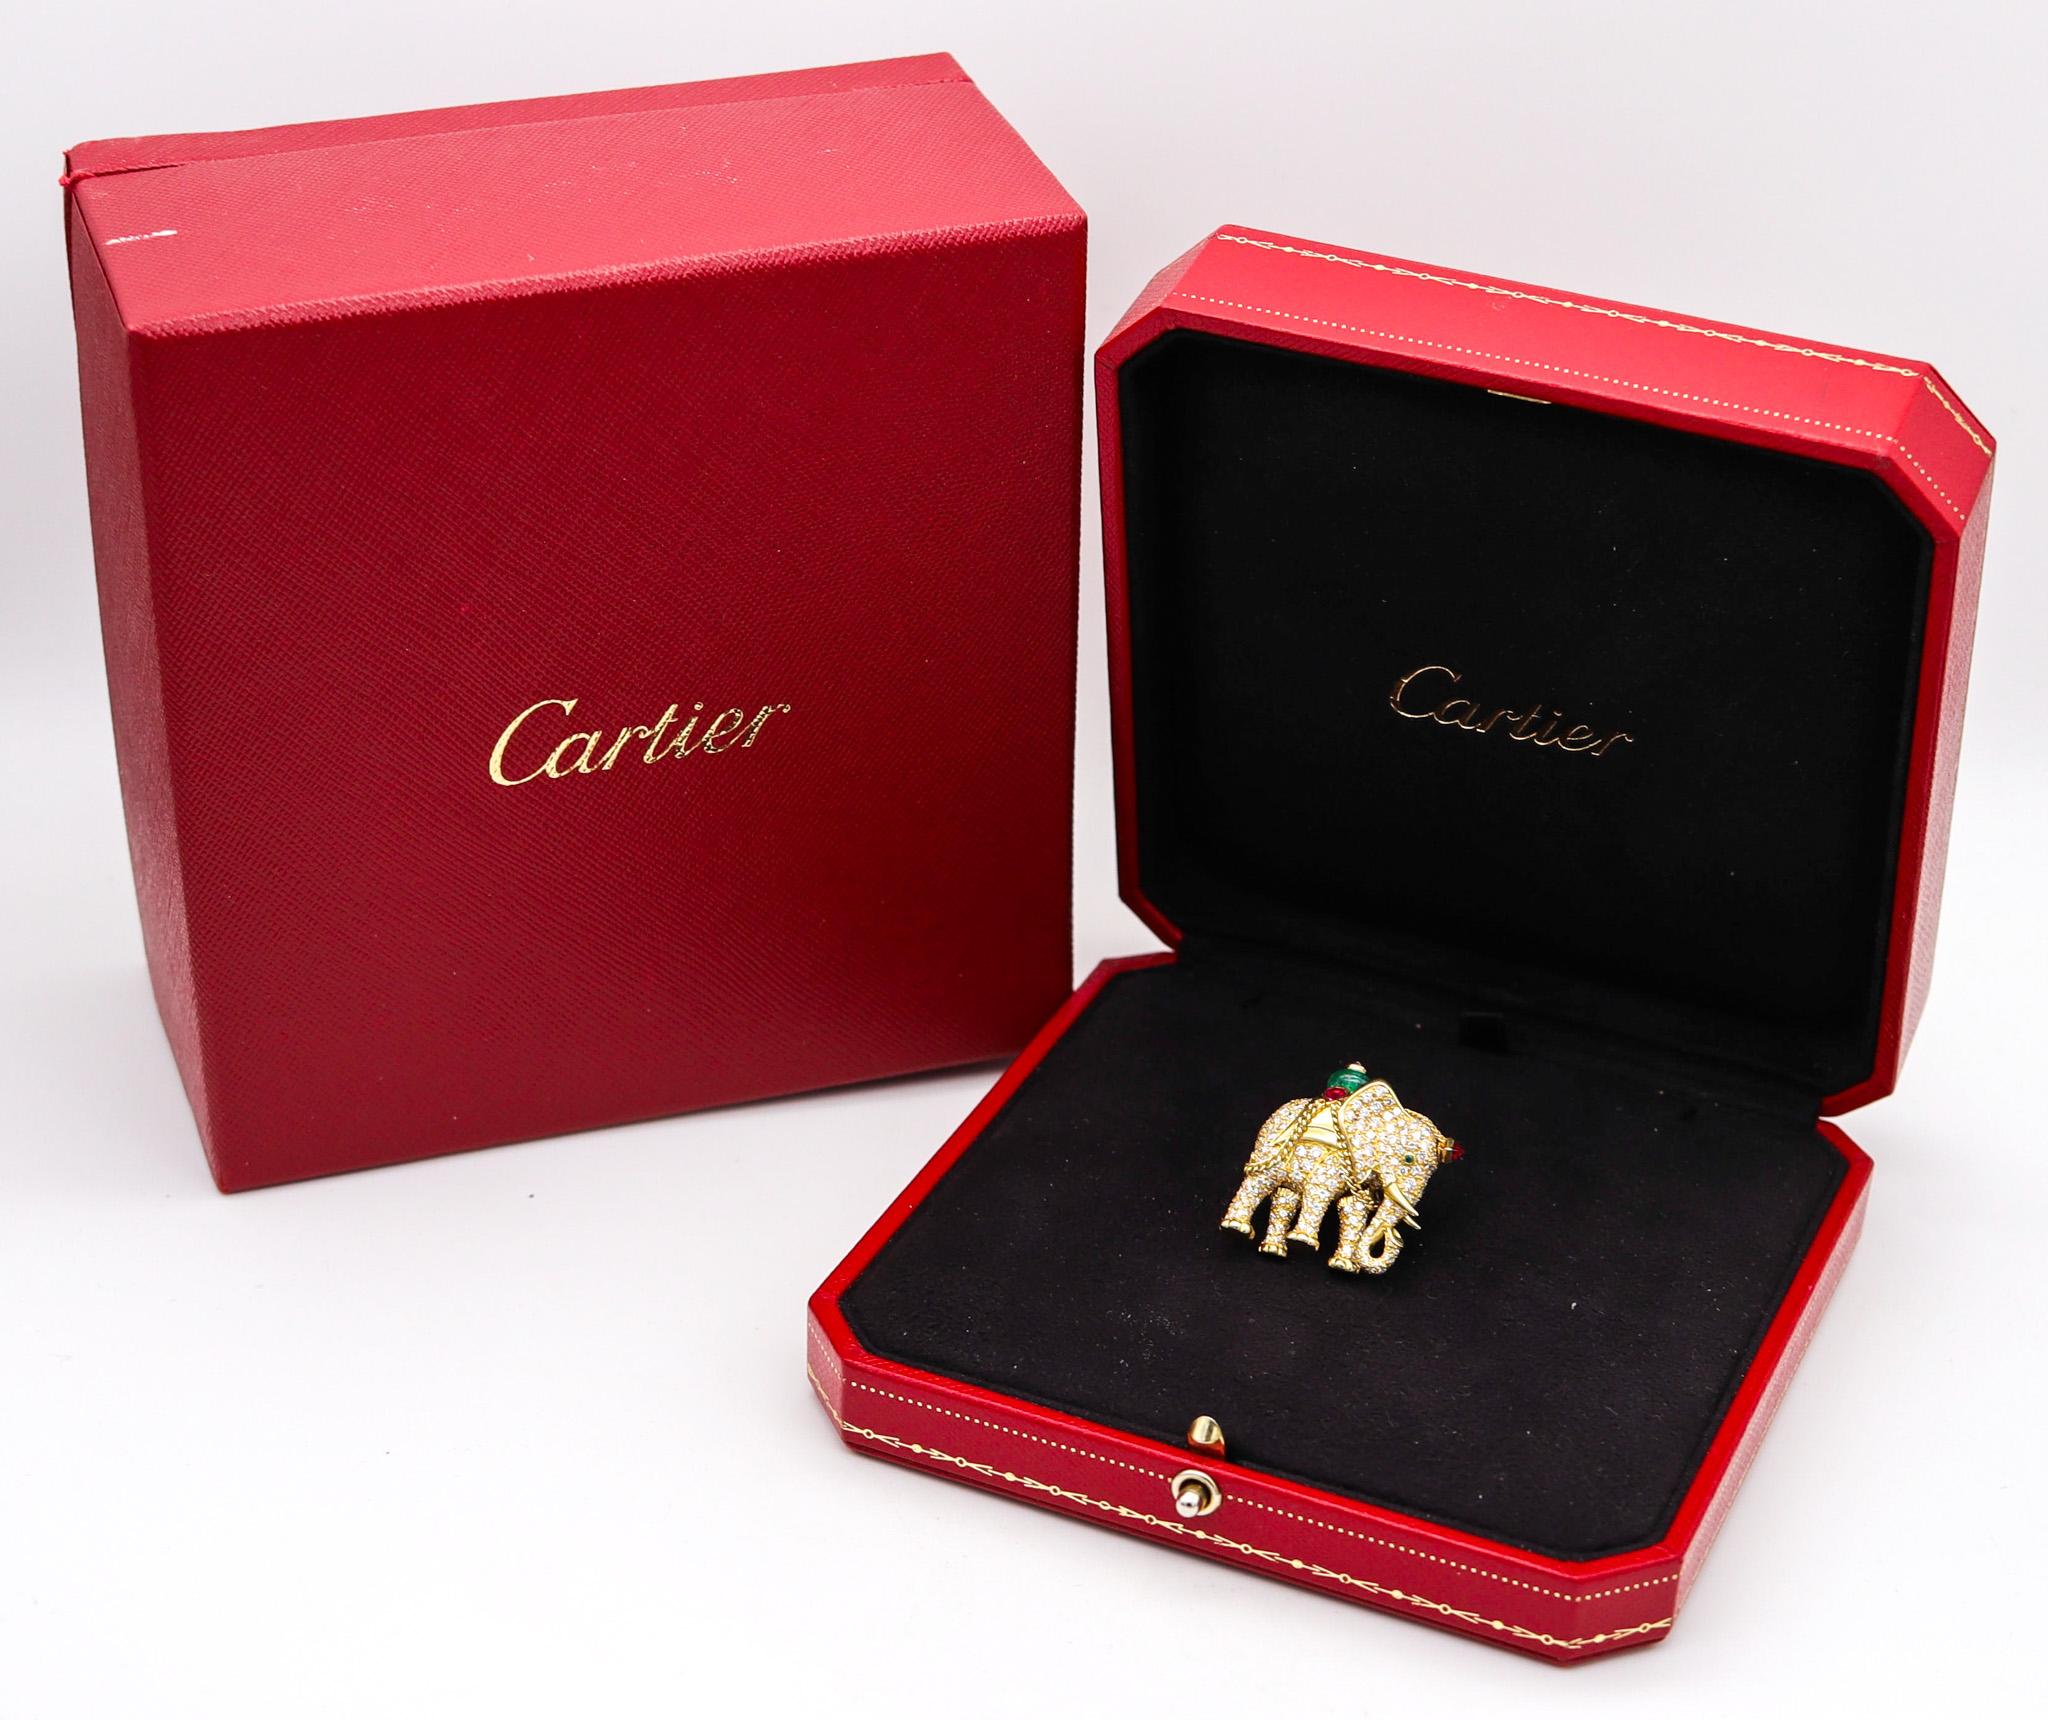 Mughal elephant brooch designed by Cartier.

Fabulous and very rare elephant brooch, created in Paris France by the jewelry house of Cartier. This gorgeous piece has been made in a very limited edition and is related to the art deco Mughal